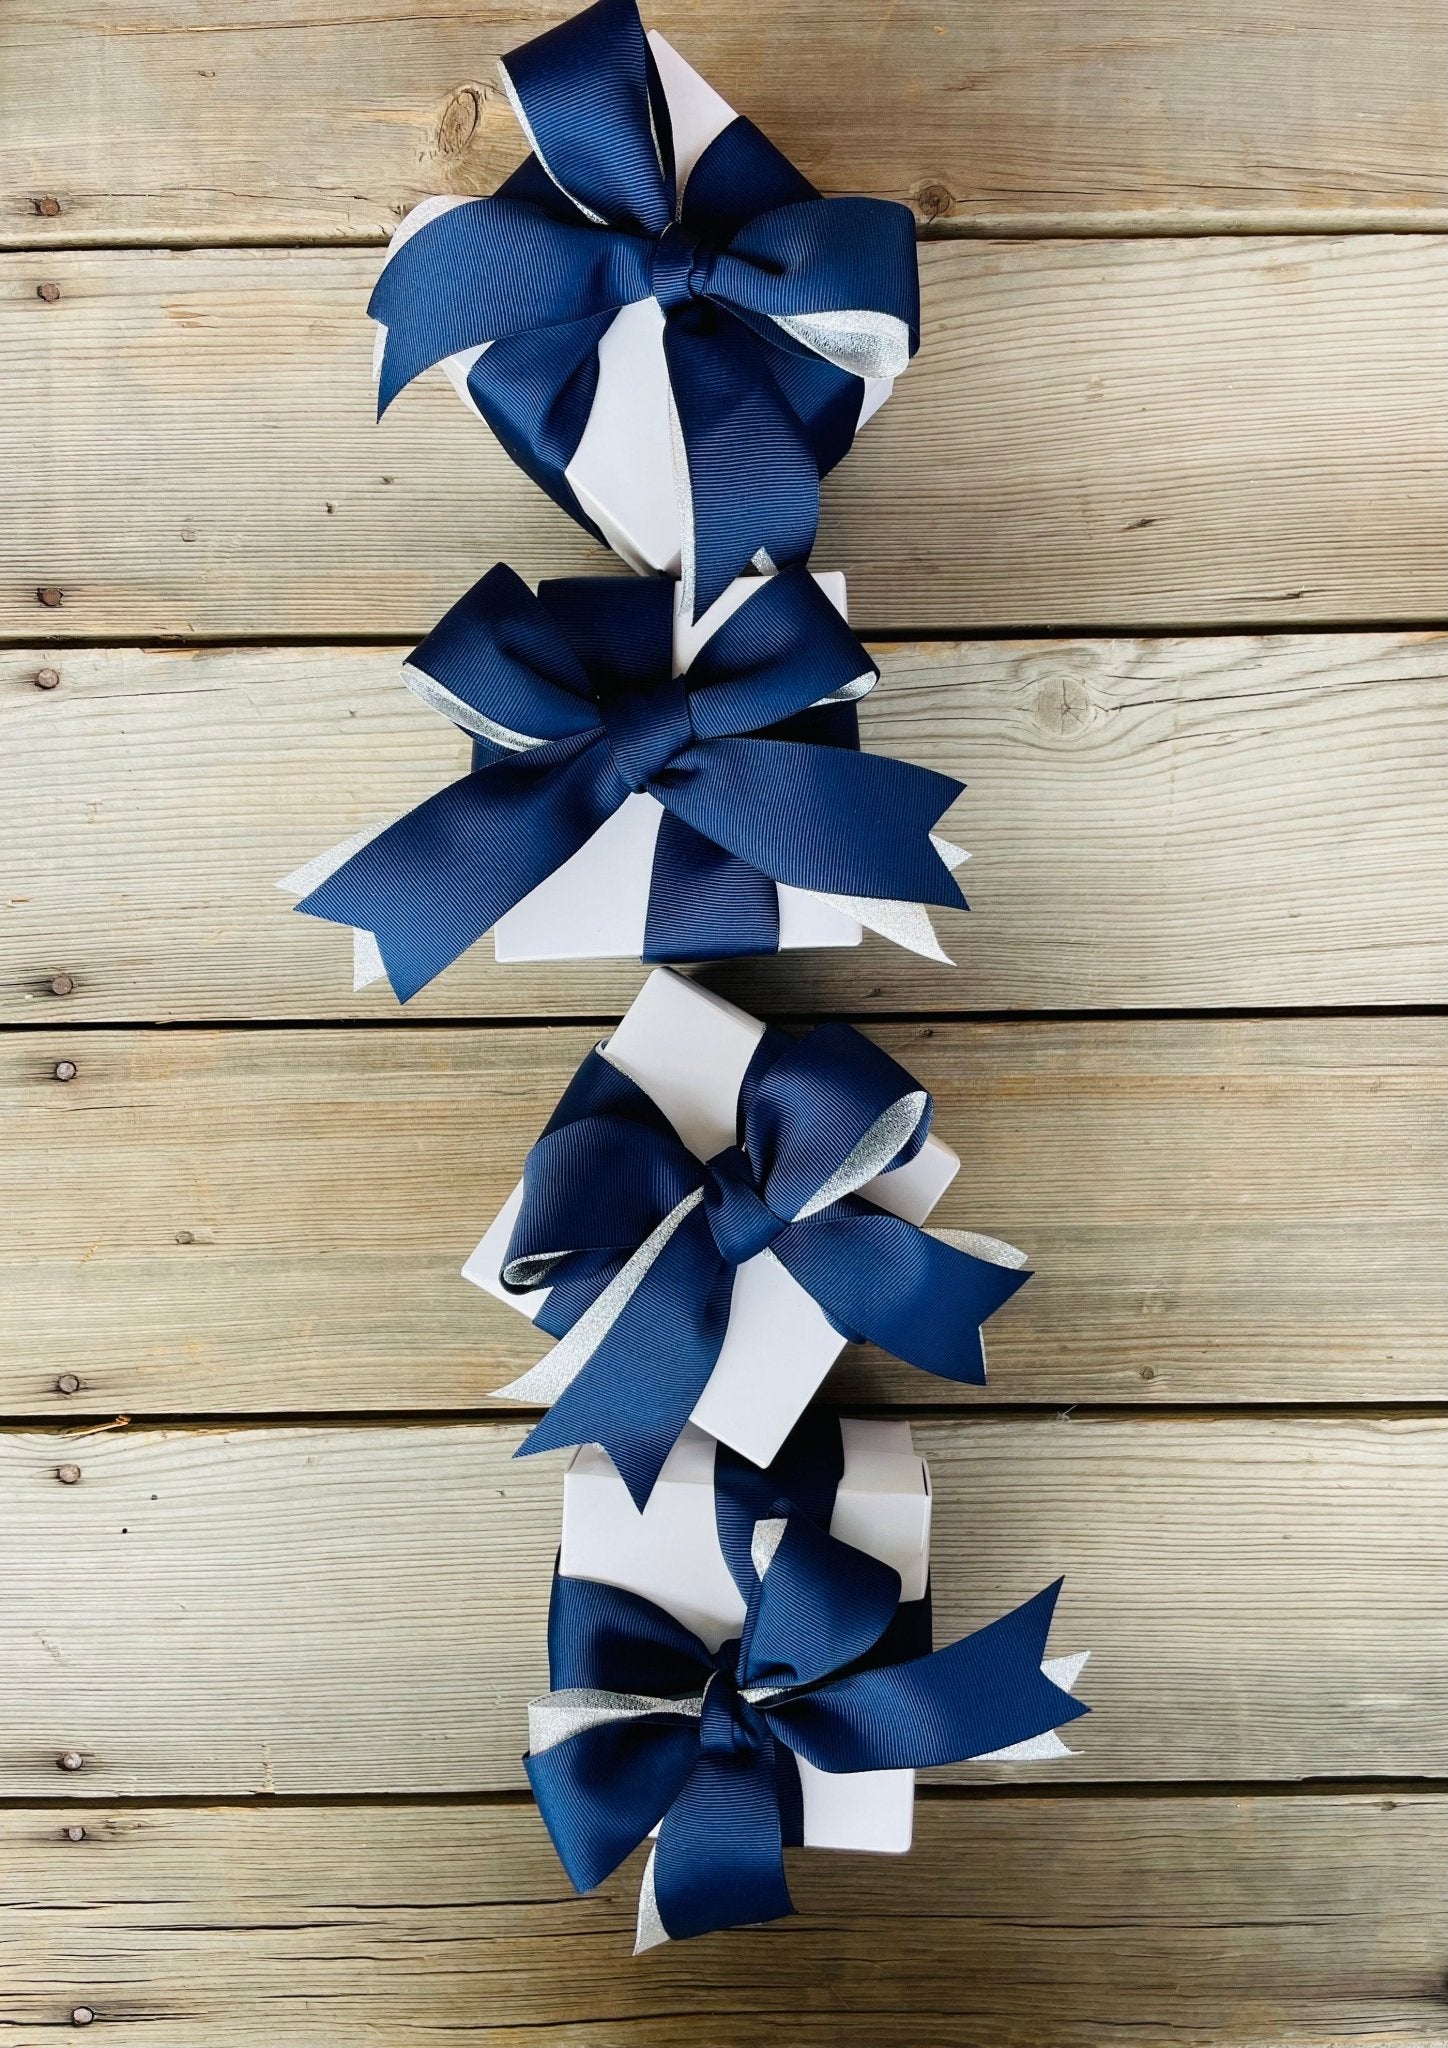 Employee Gifts That Leave a Lasting Impression: Tips for Memorable Gifting - Nifty Package Co